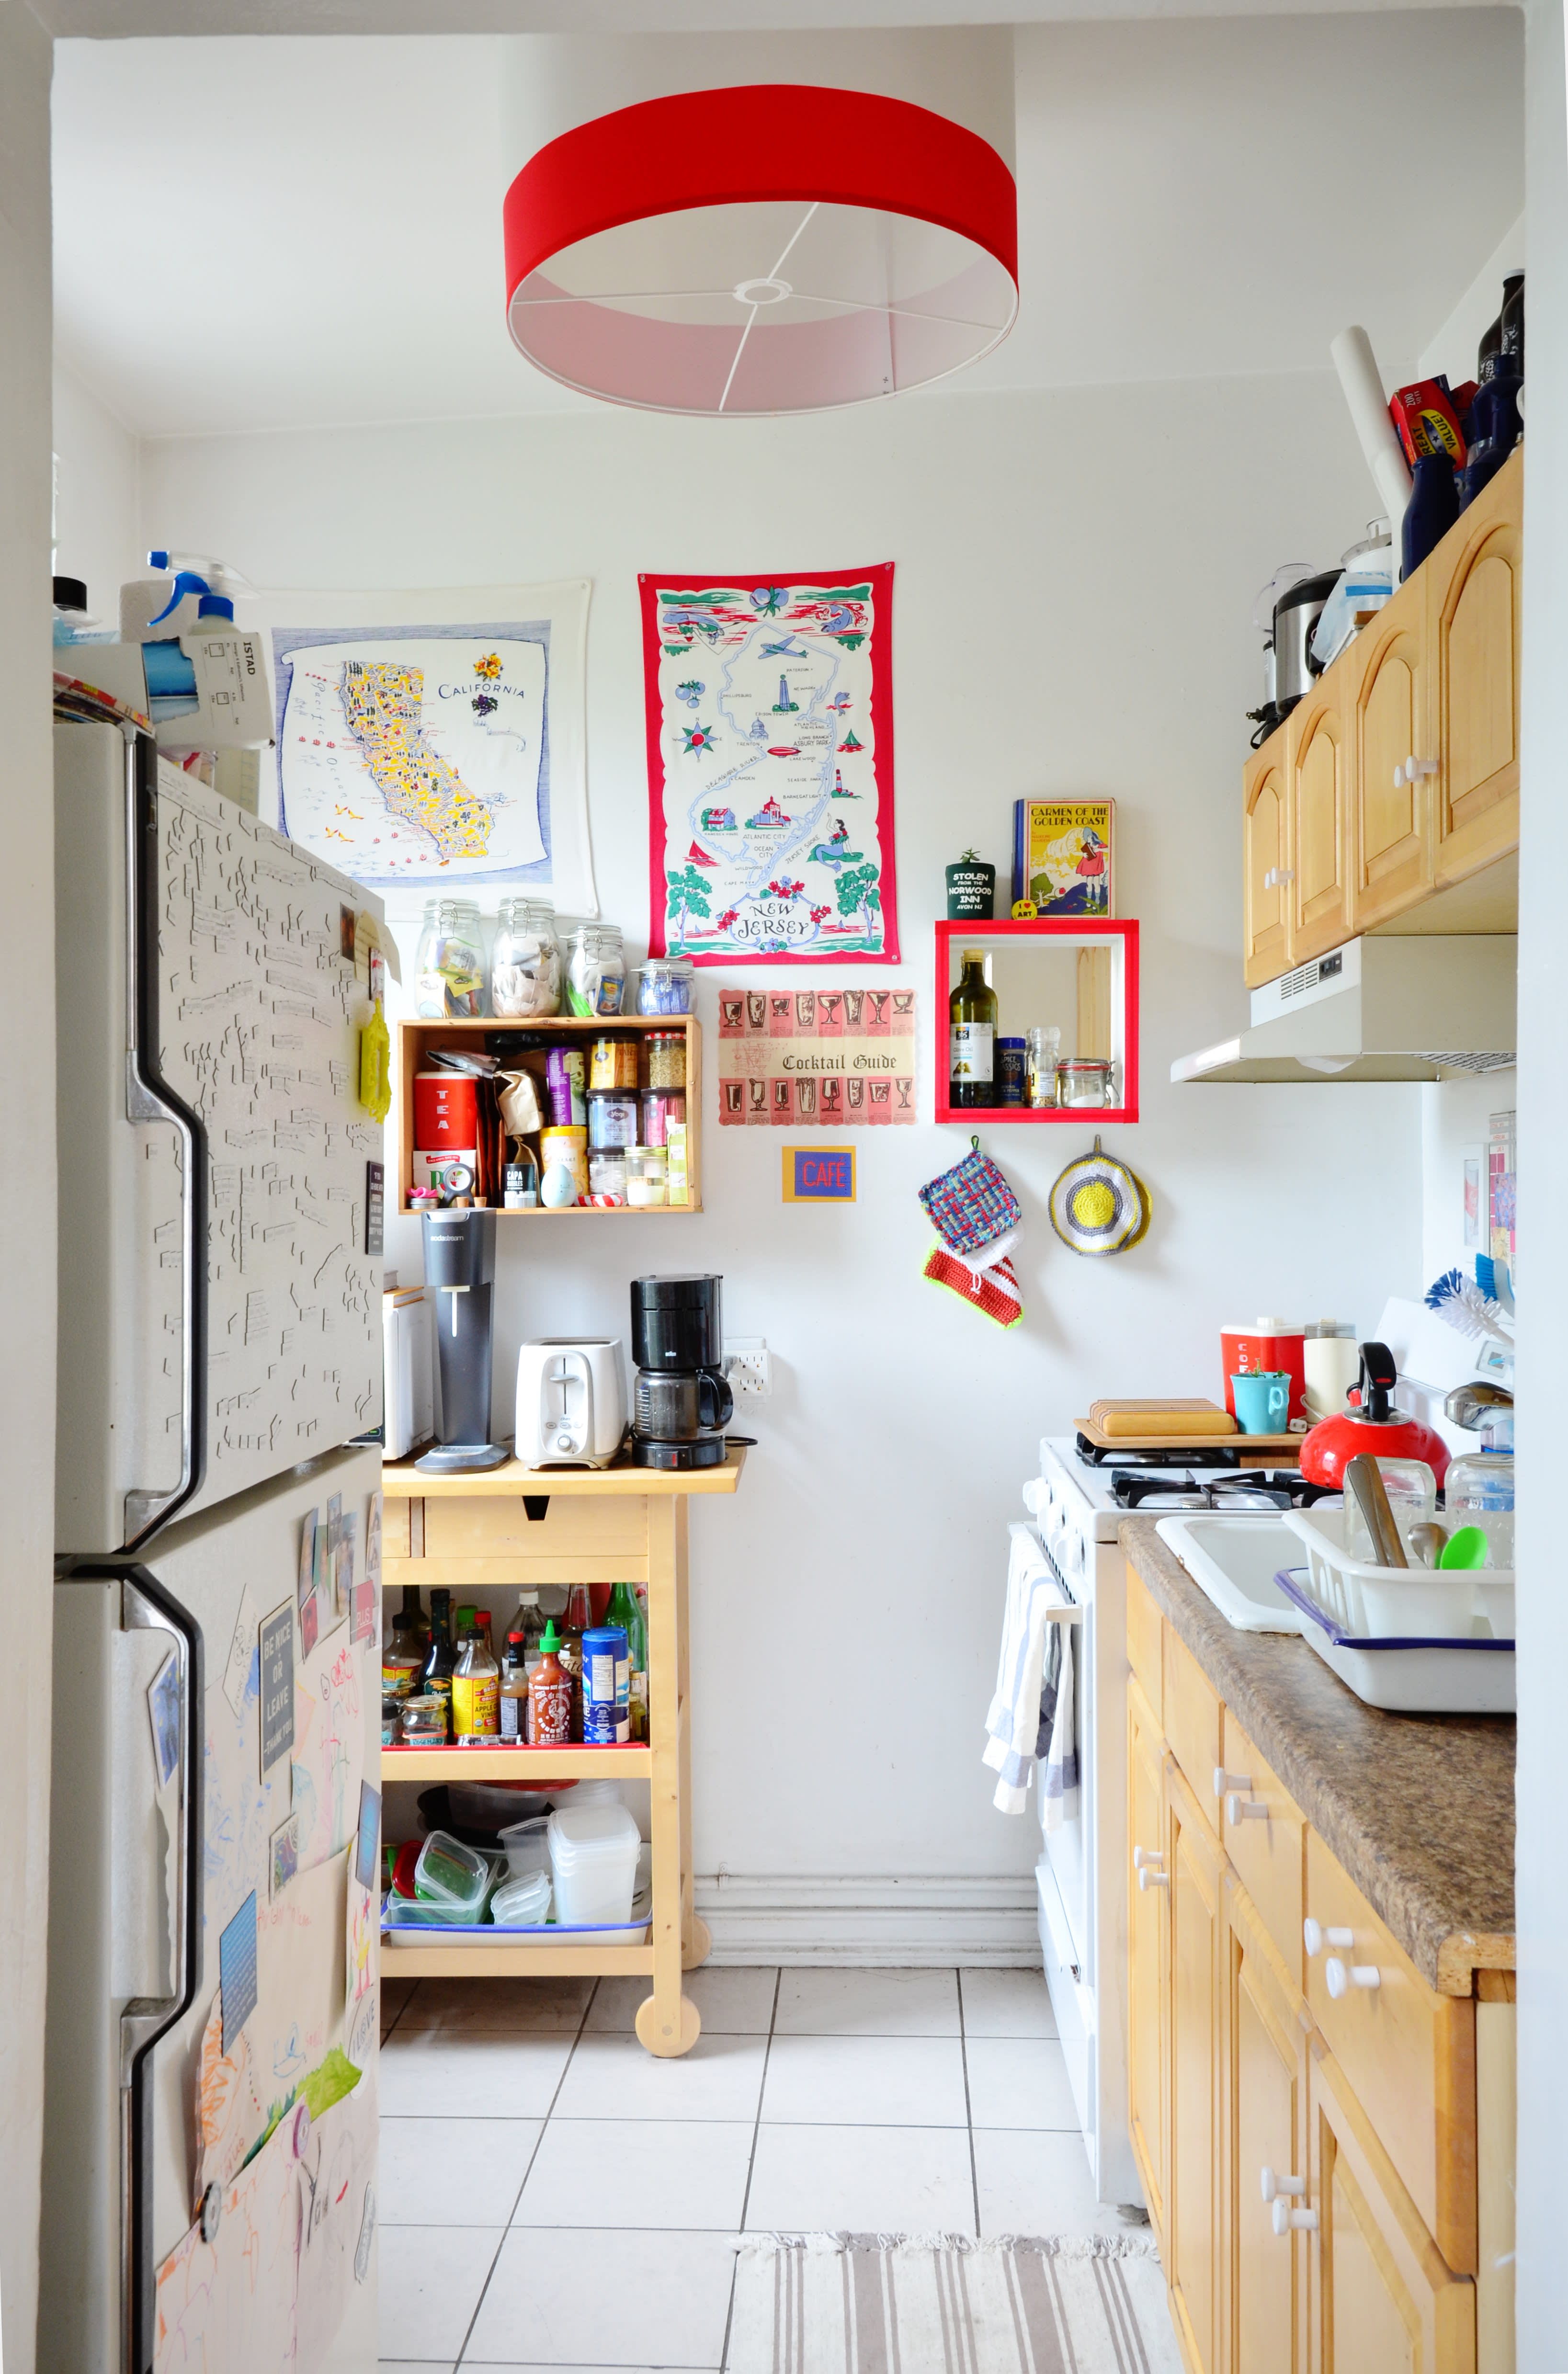 14 Ways to Update an Ugly Rental Kitchen